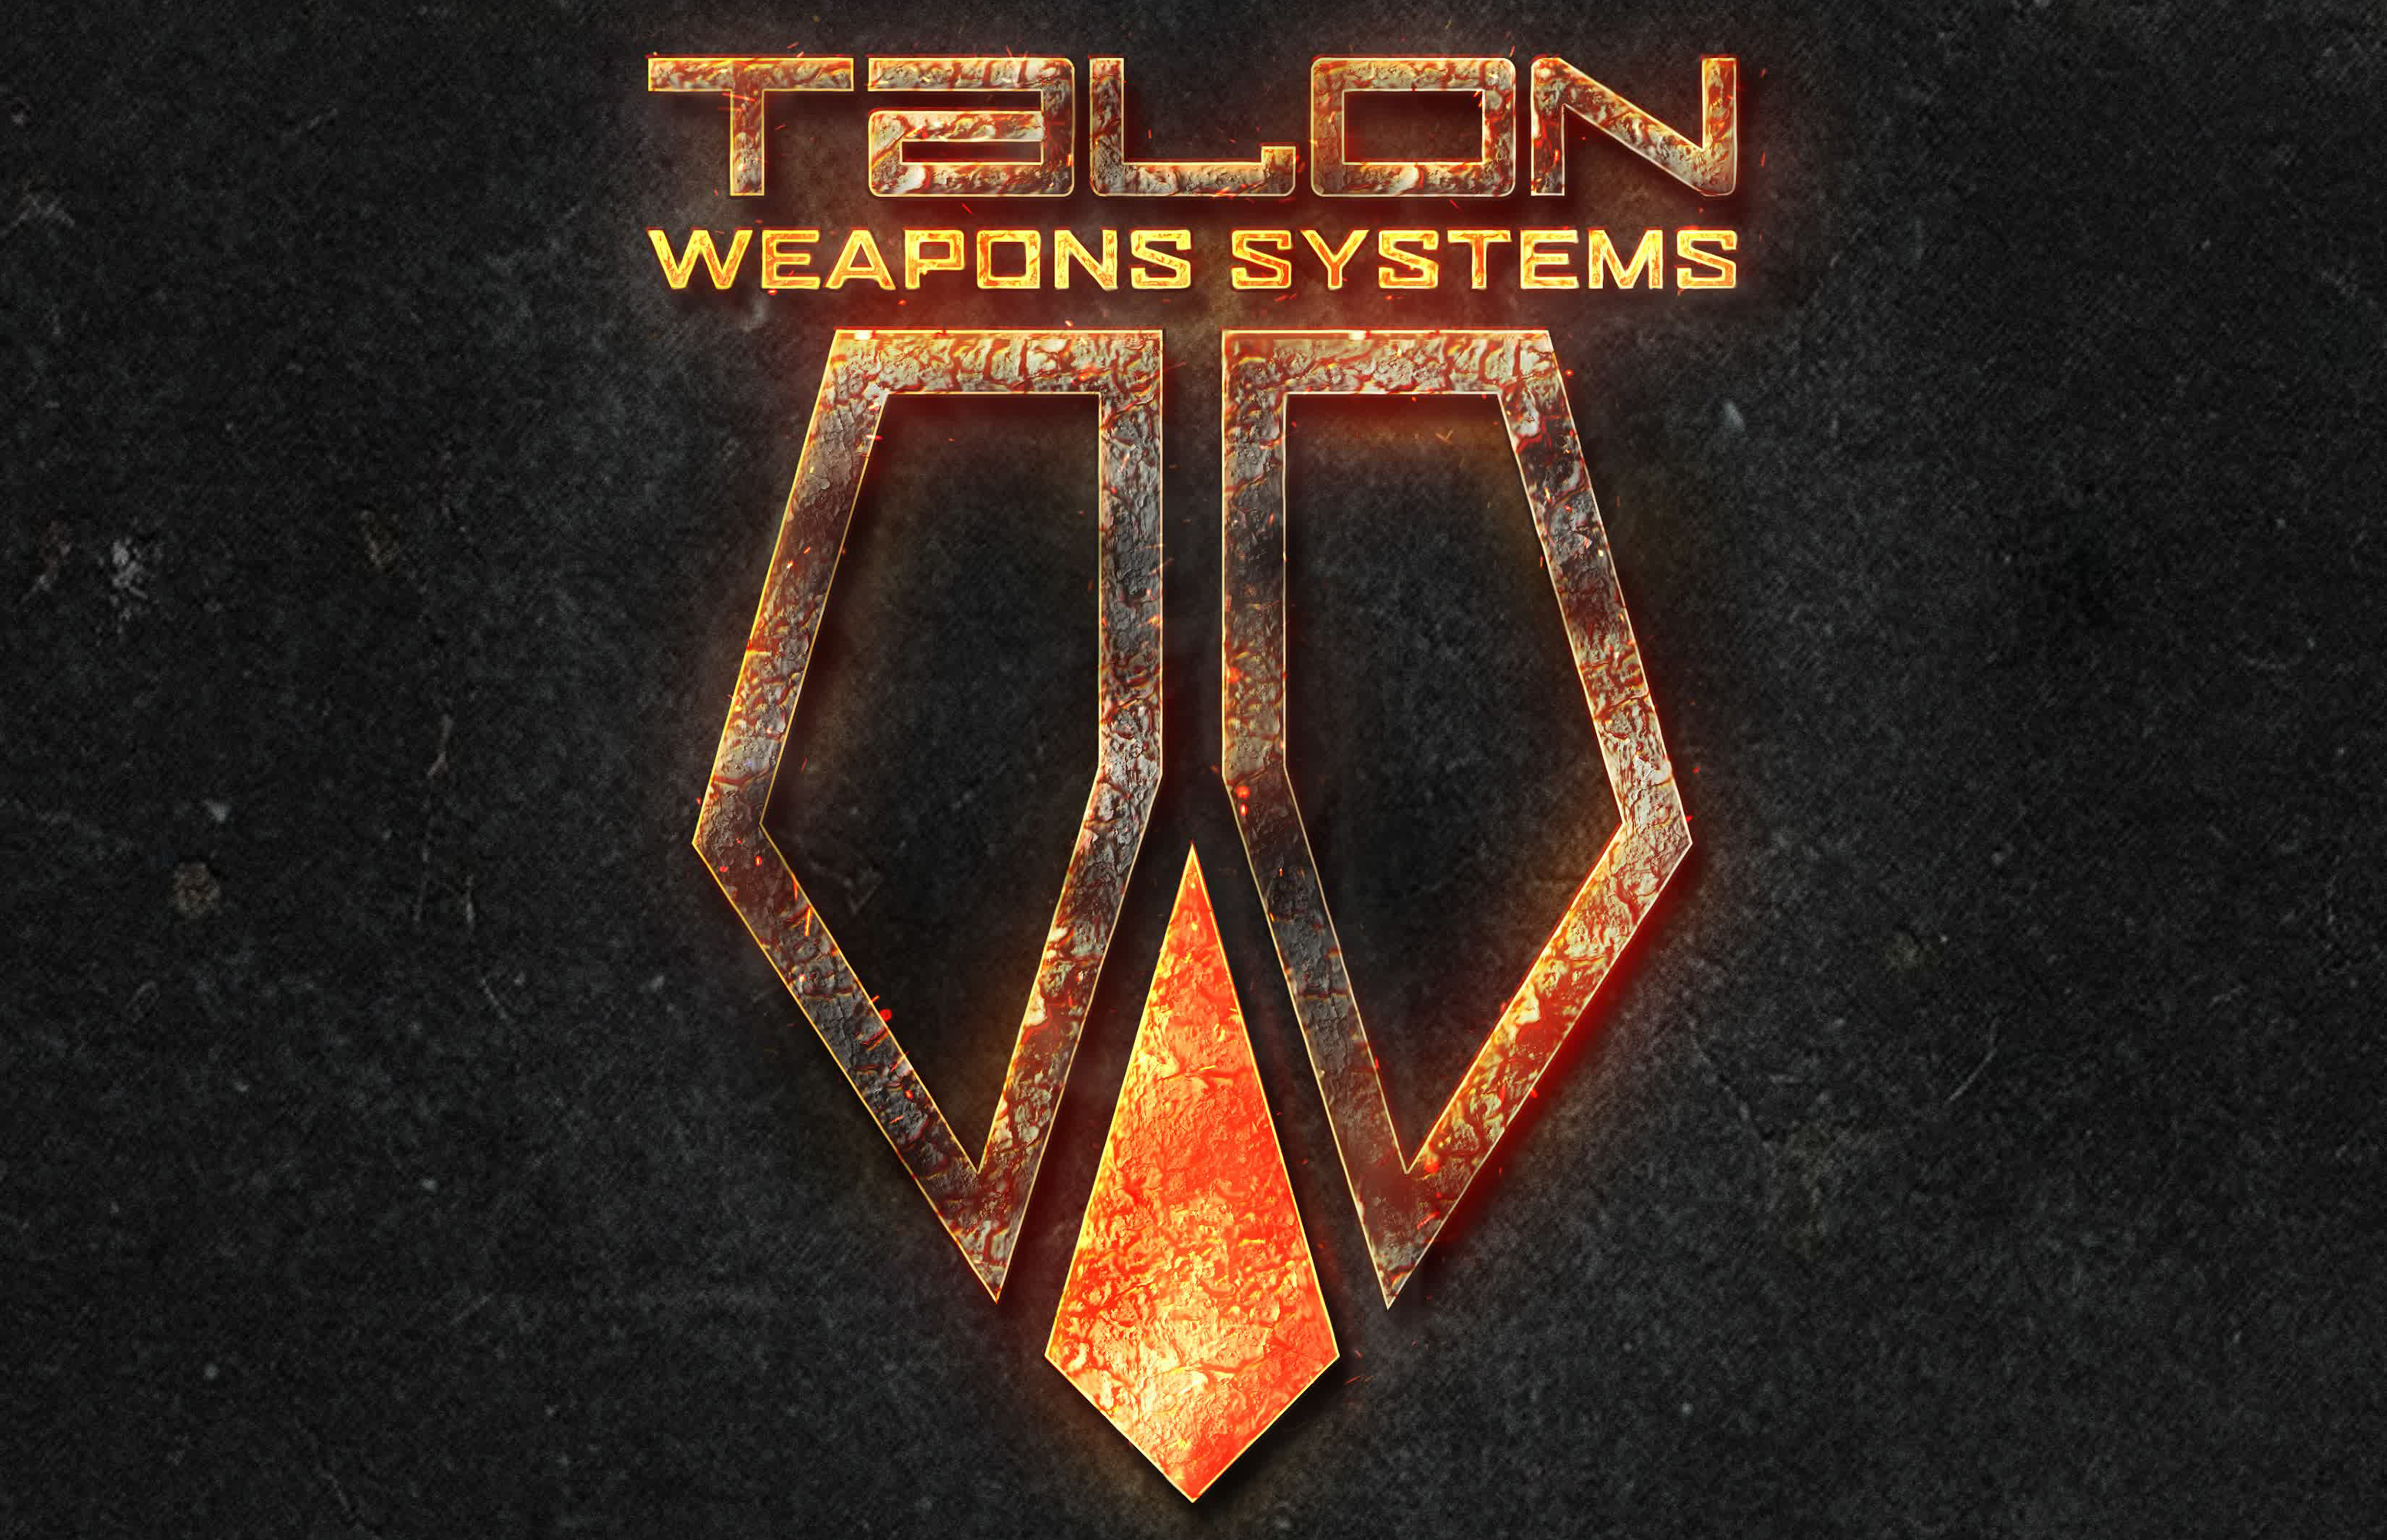 Talon_Weapons_Systems.png